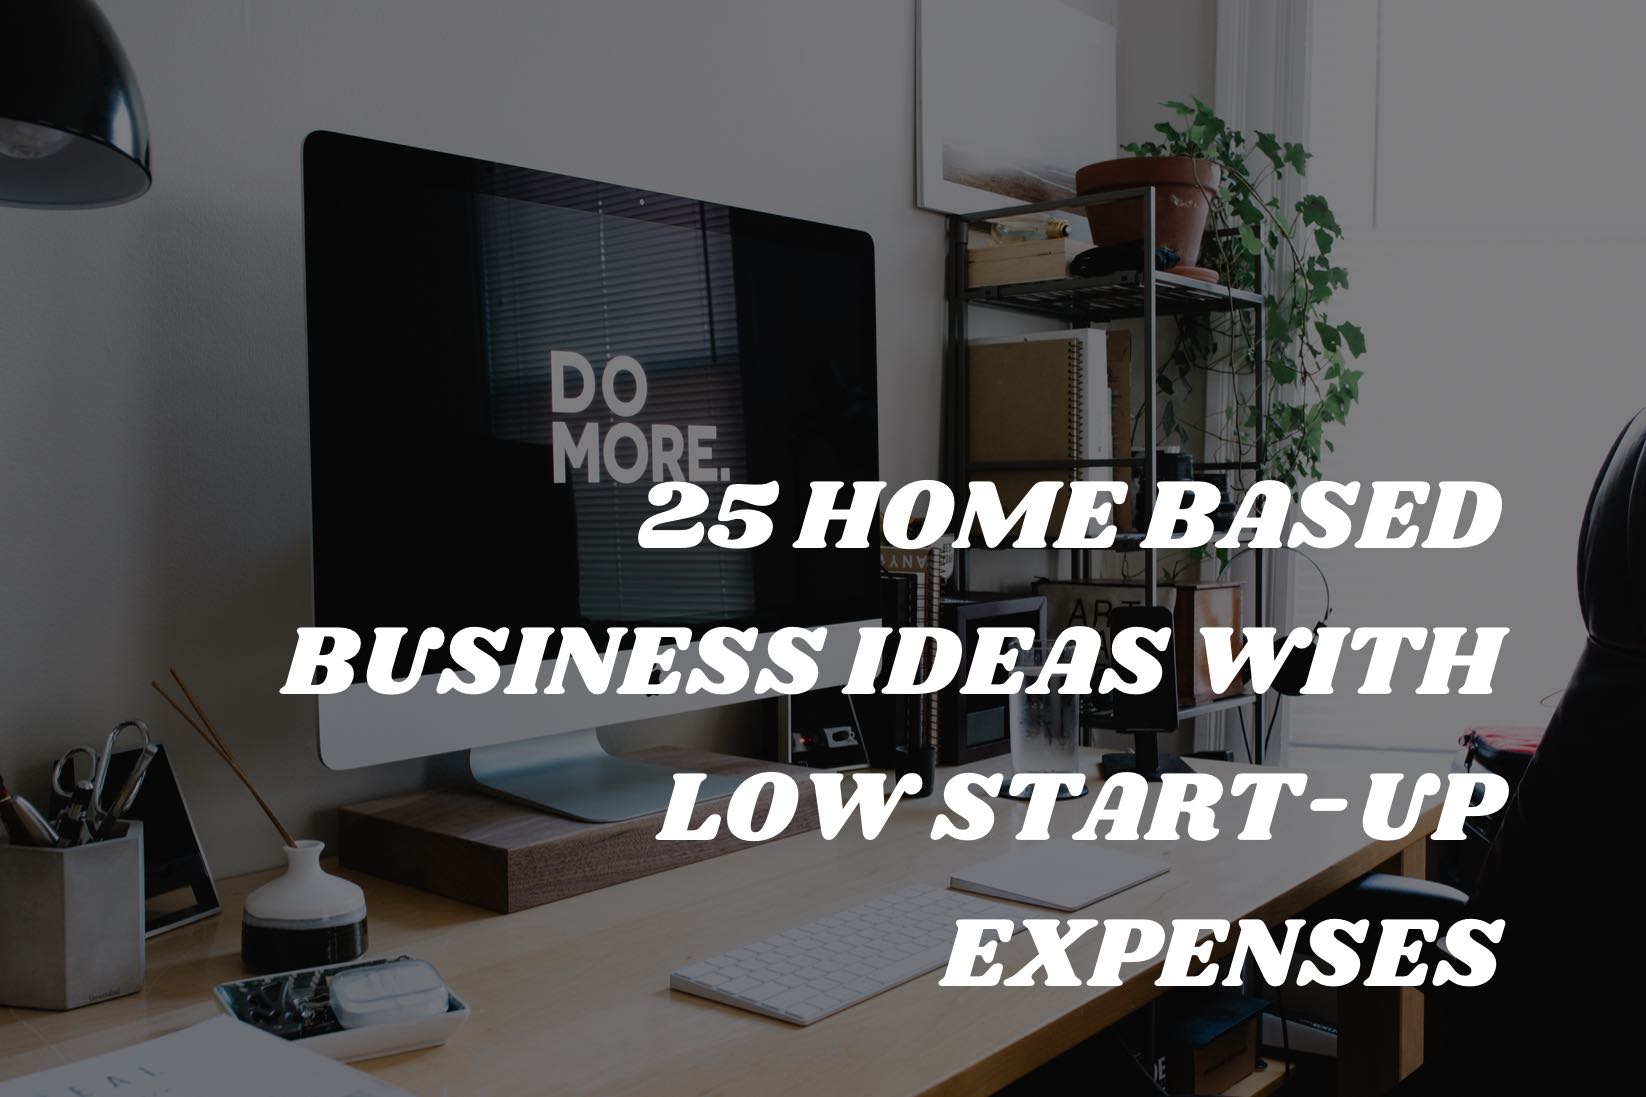 25-home-based-business-ideas-with-low-start-up-expenses